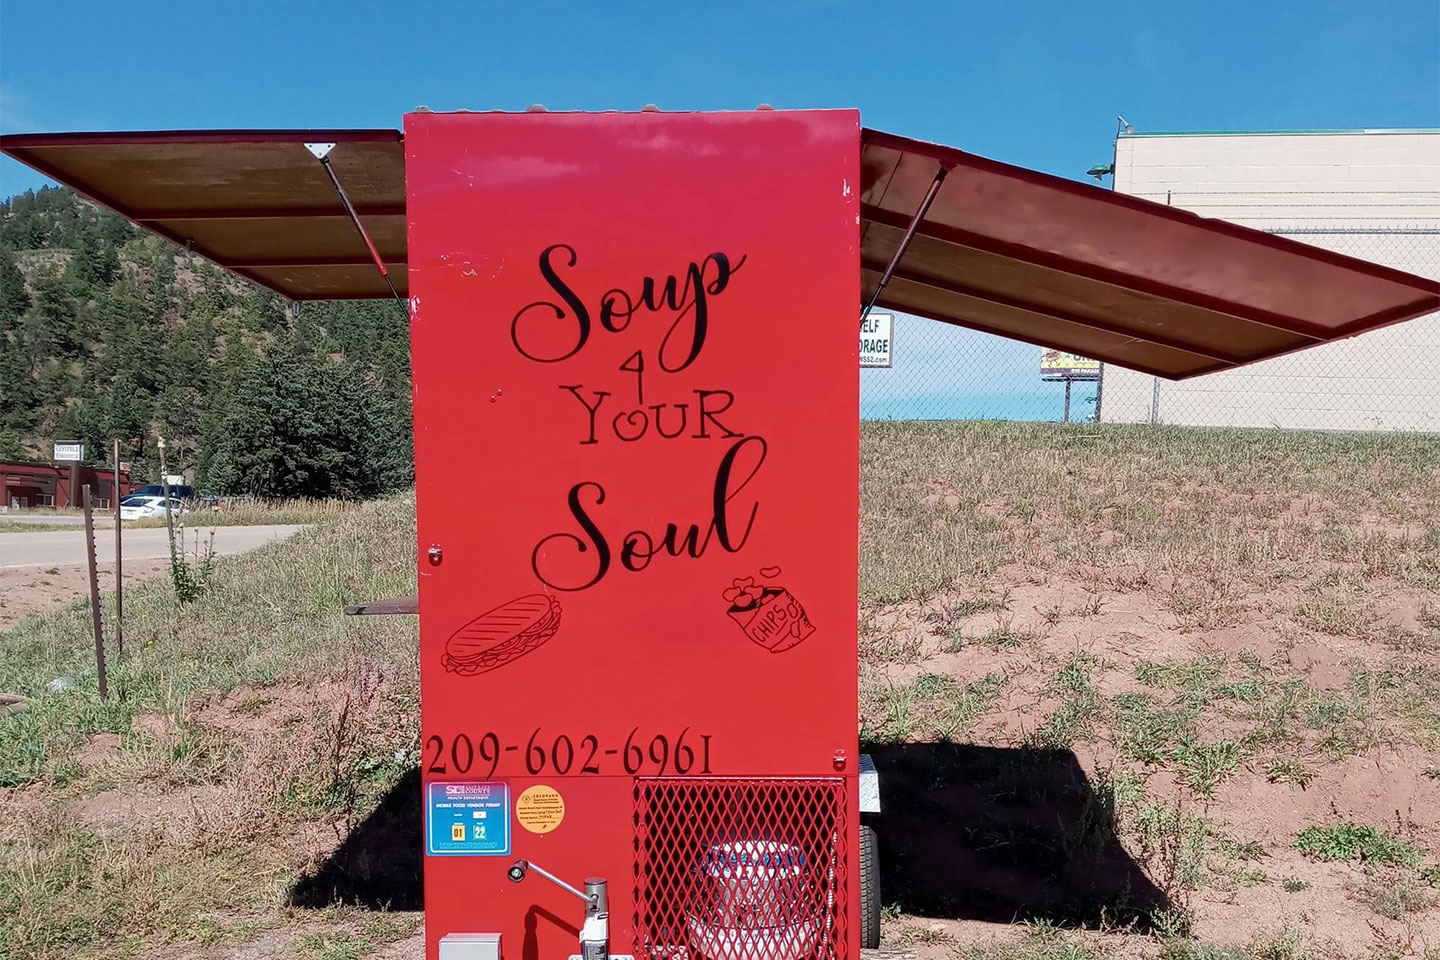 Soup 4 Your Soul takes pride in their homemade soups and fresh bread that is baked daily.